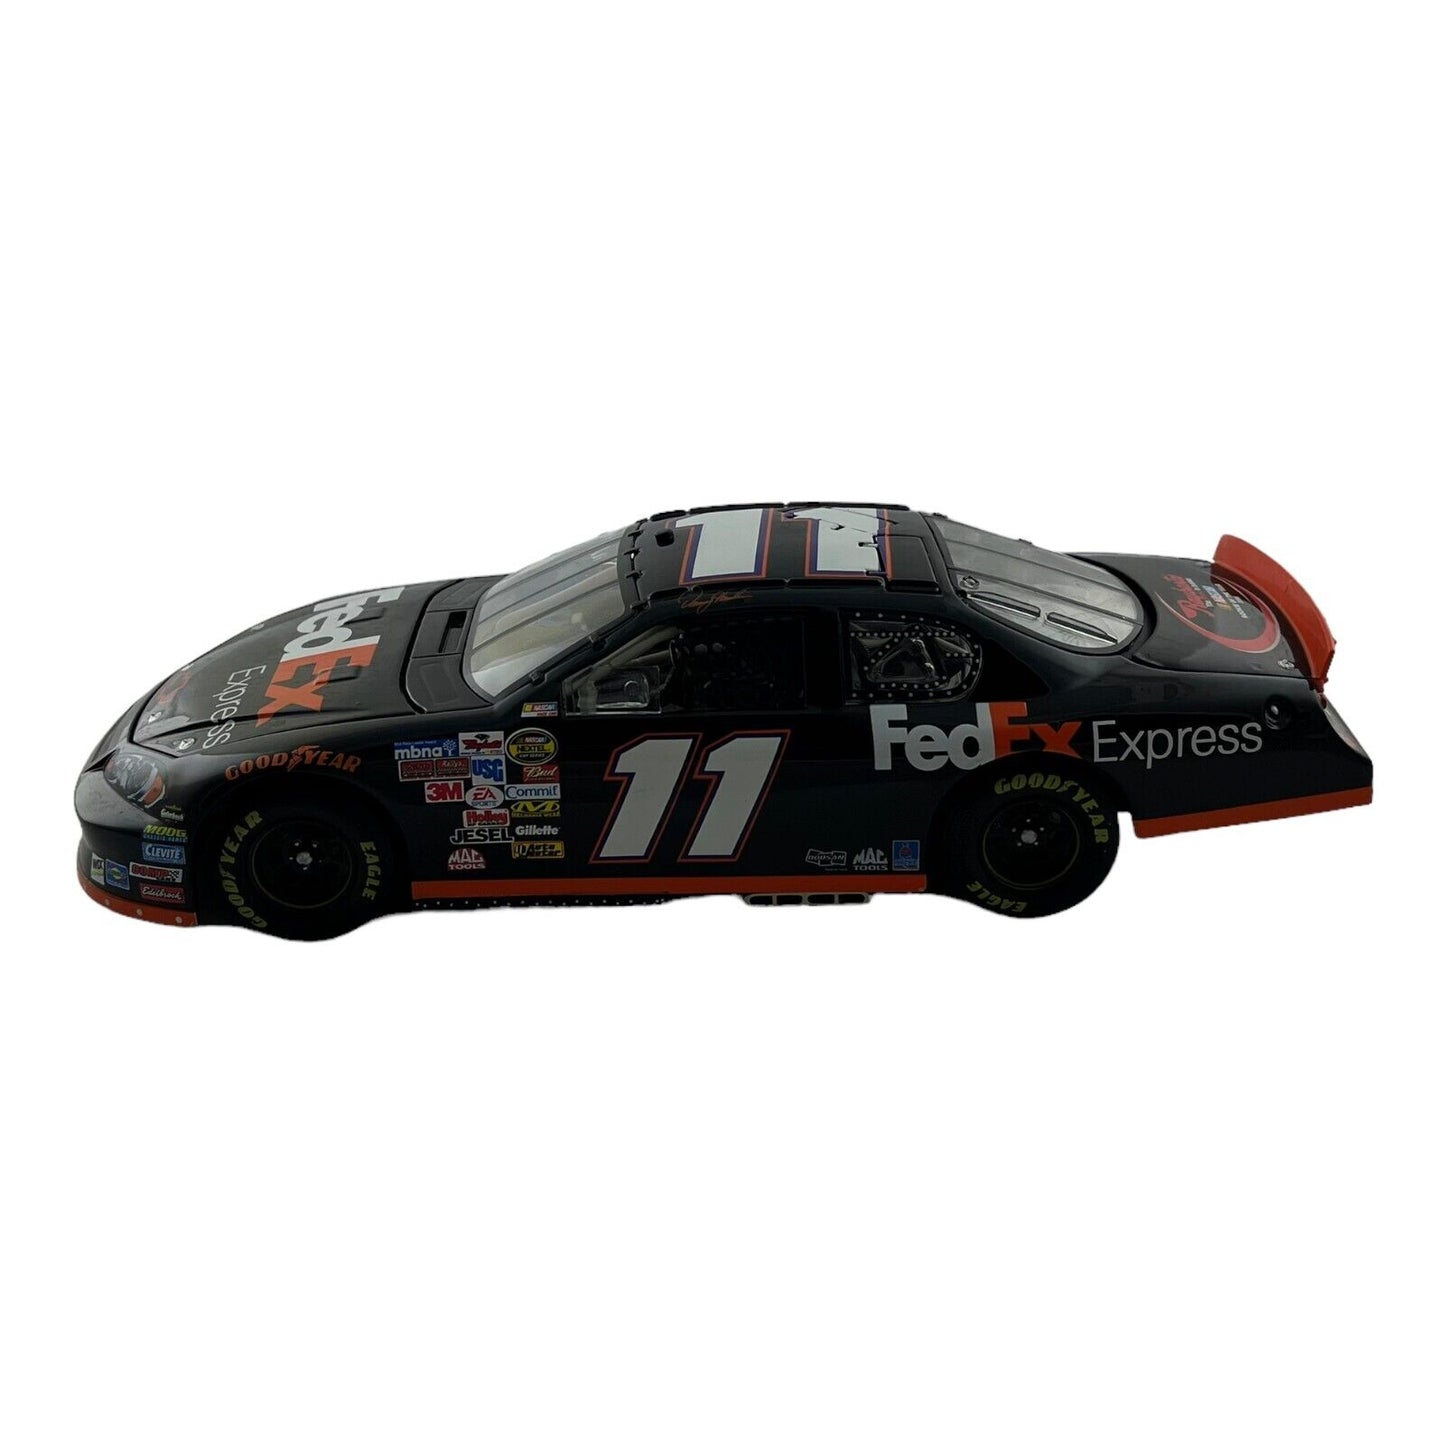 1:24 Scale Denny Hamlin #11 FedEx Express Rookie of the Year Diecast 1 of 504